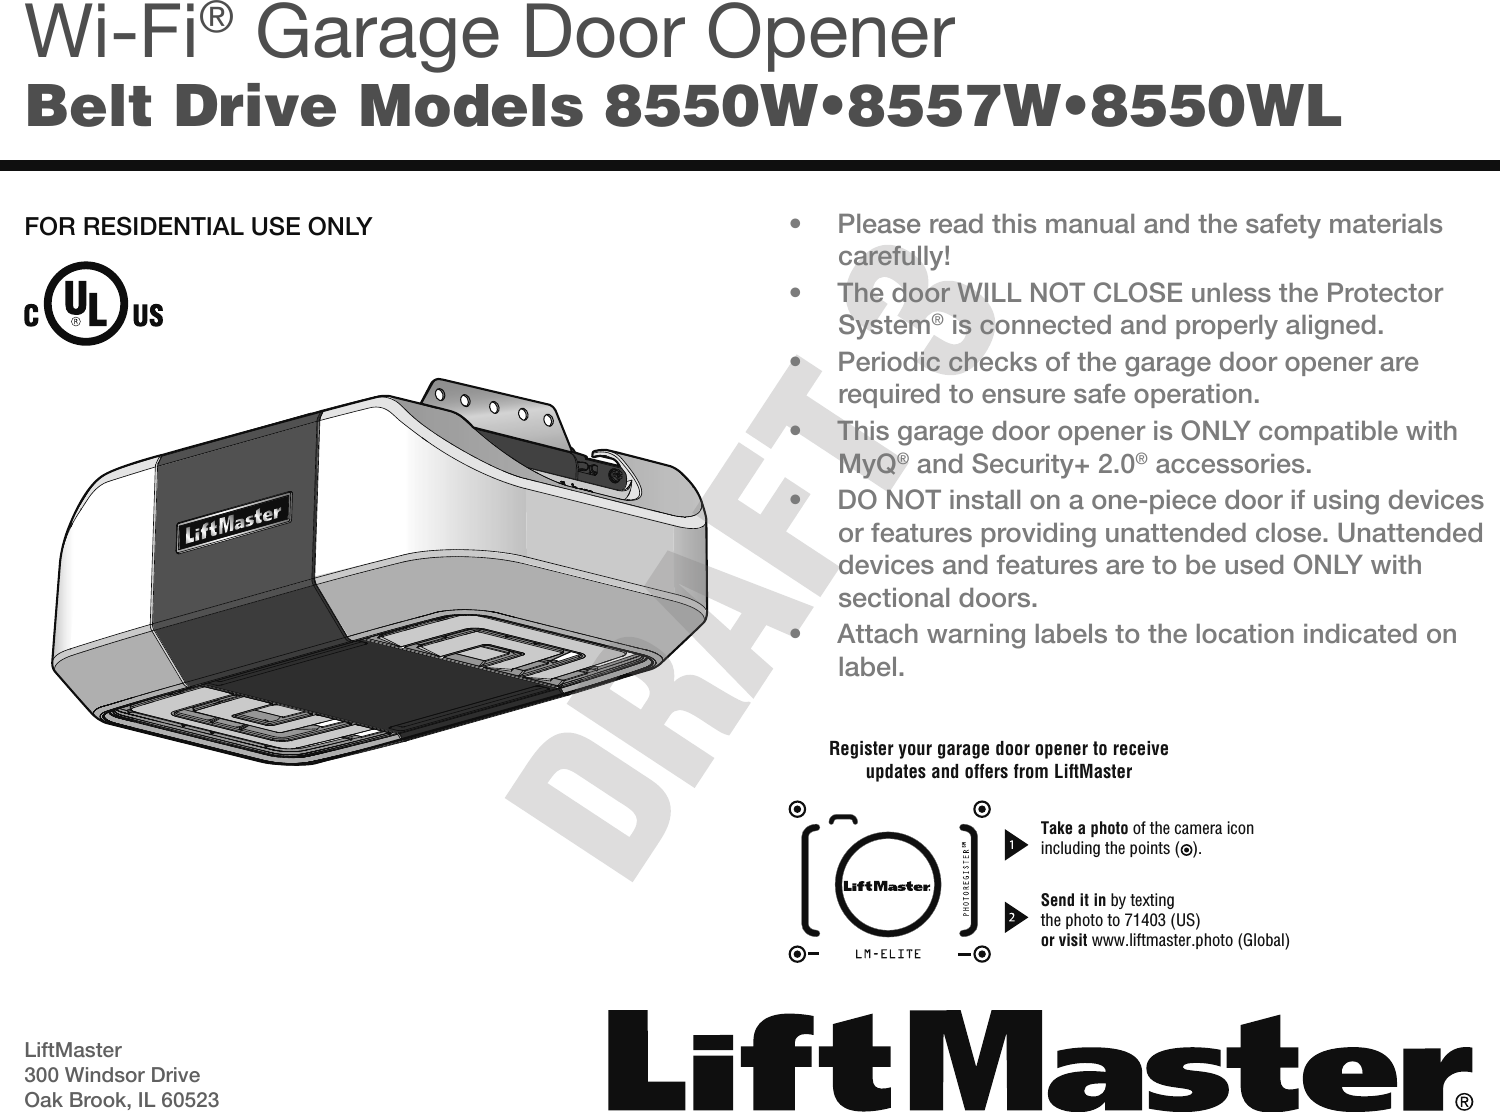 LiftMaster300 Windsor DriveOak Brook, IL 60523SMWi-Fi® Garage Door OpenerBelt Drive Models 8550W•8557W•8550WL• Please read this manual and the safety materialscarefully!• The door WILL NOT CLOSE unless the ProtectorSystem® is connected and properly aligned.• Periodic checks of the garage door opener arerequired to ensure safe operation.• This garage door opener is ONLY compatible withMyQ® and Security+ 2.0® accessories.• DO NOT install on a one-piece door if using devicesor features providing unattended close. Unattendeddevices and features are to be used ONLY withsectional doors.• Attach warning labels to the location indicated onlabel.FOR RESIDENTIAL USE ONLYRegister your garage door opener to receiveupdates and offers from LiftMasterTake a photo of the camera iconincluding the points (   ).Send it in by textingthe photo to 71403 (US)or visit www.liftmaster.photo (Global)